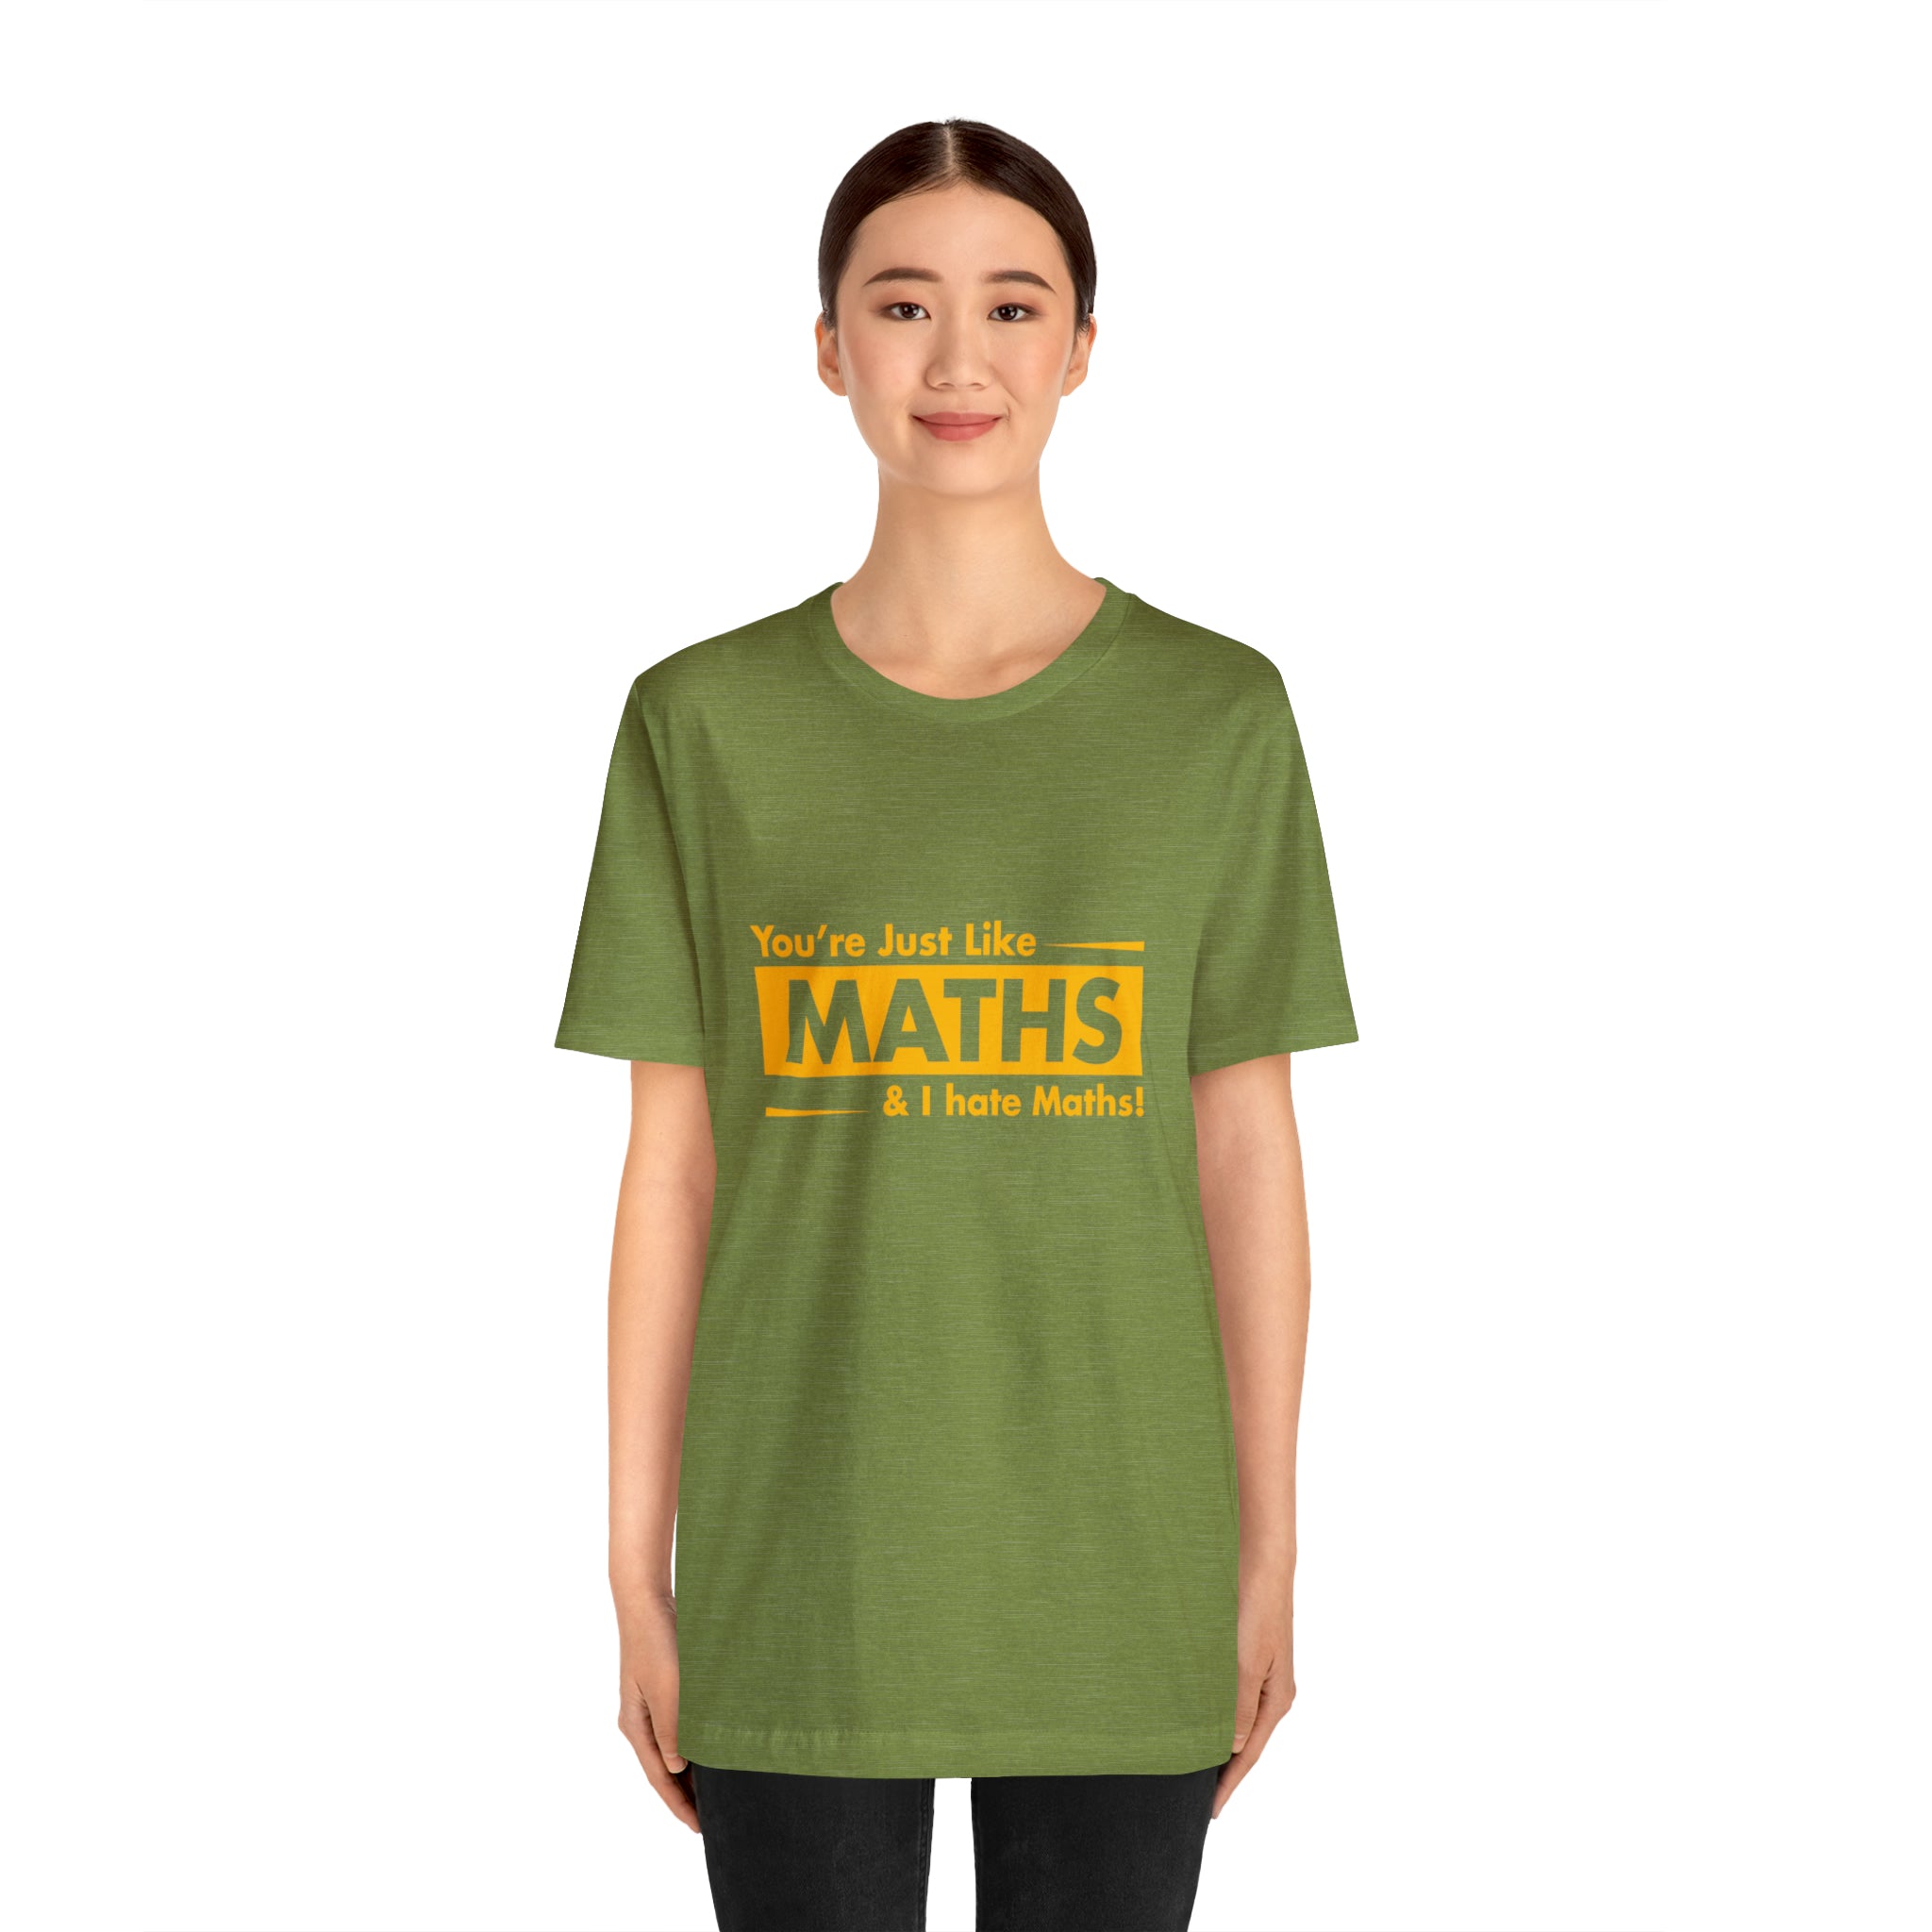 A woman with a great fashion sense wearing a green "You are just like maths and I hate maths" T-shirt.